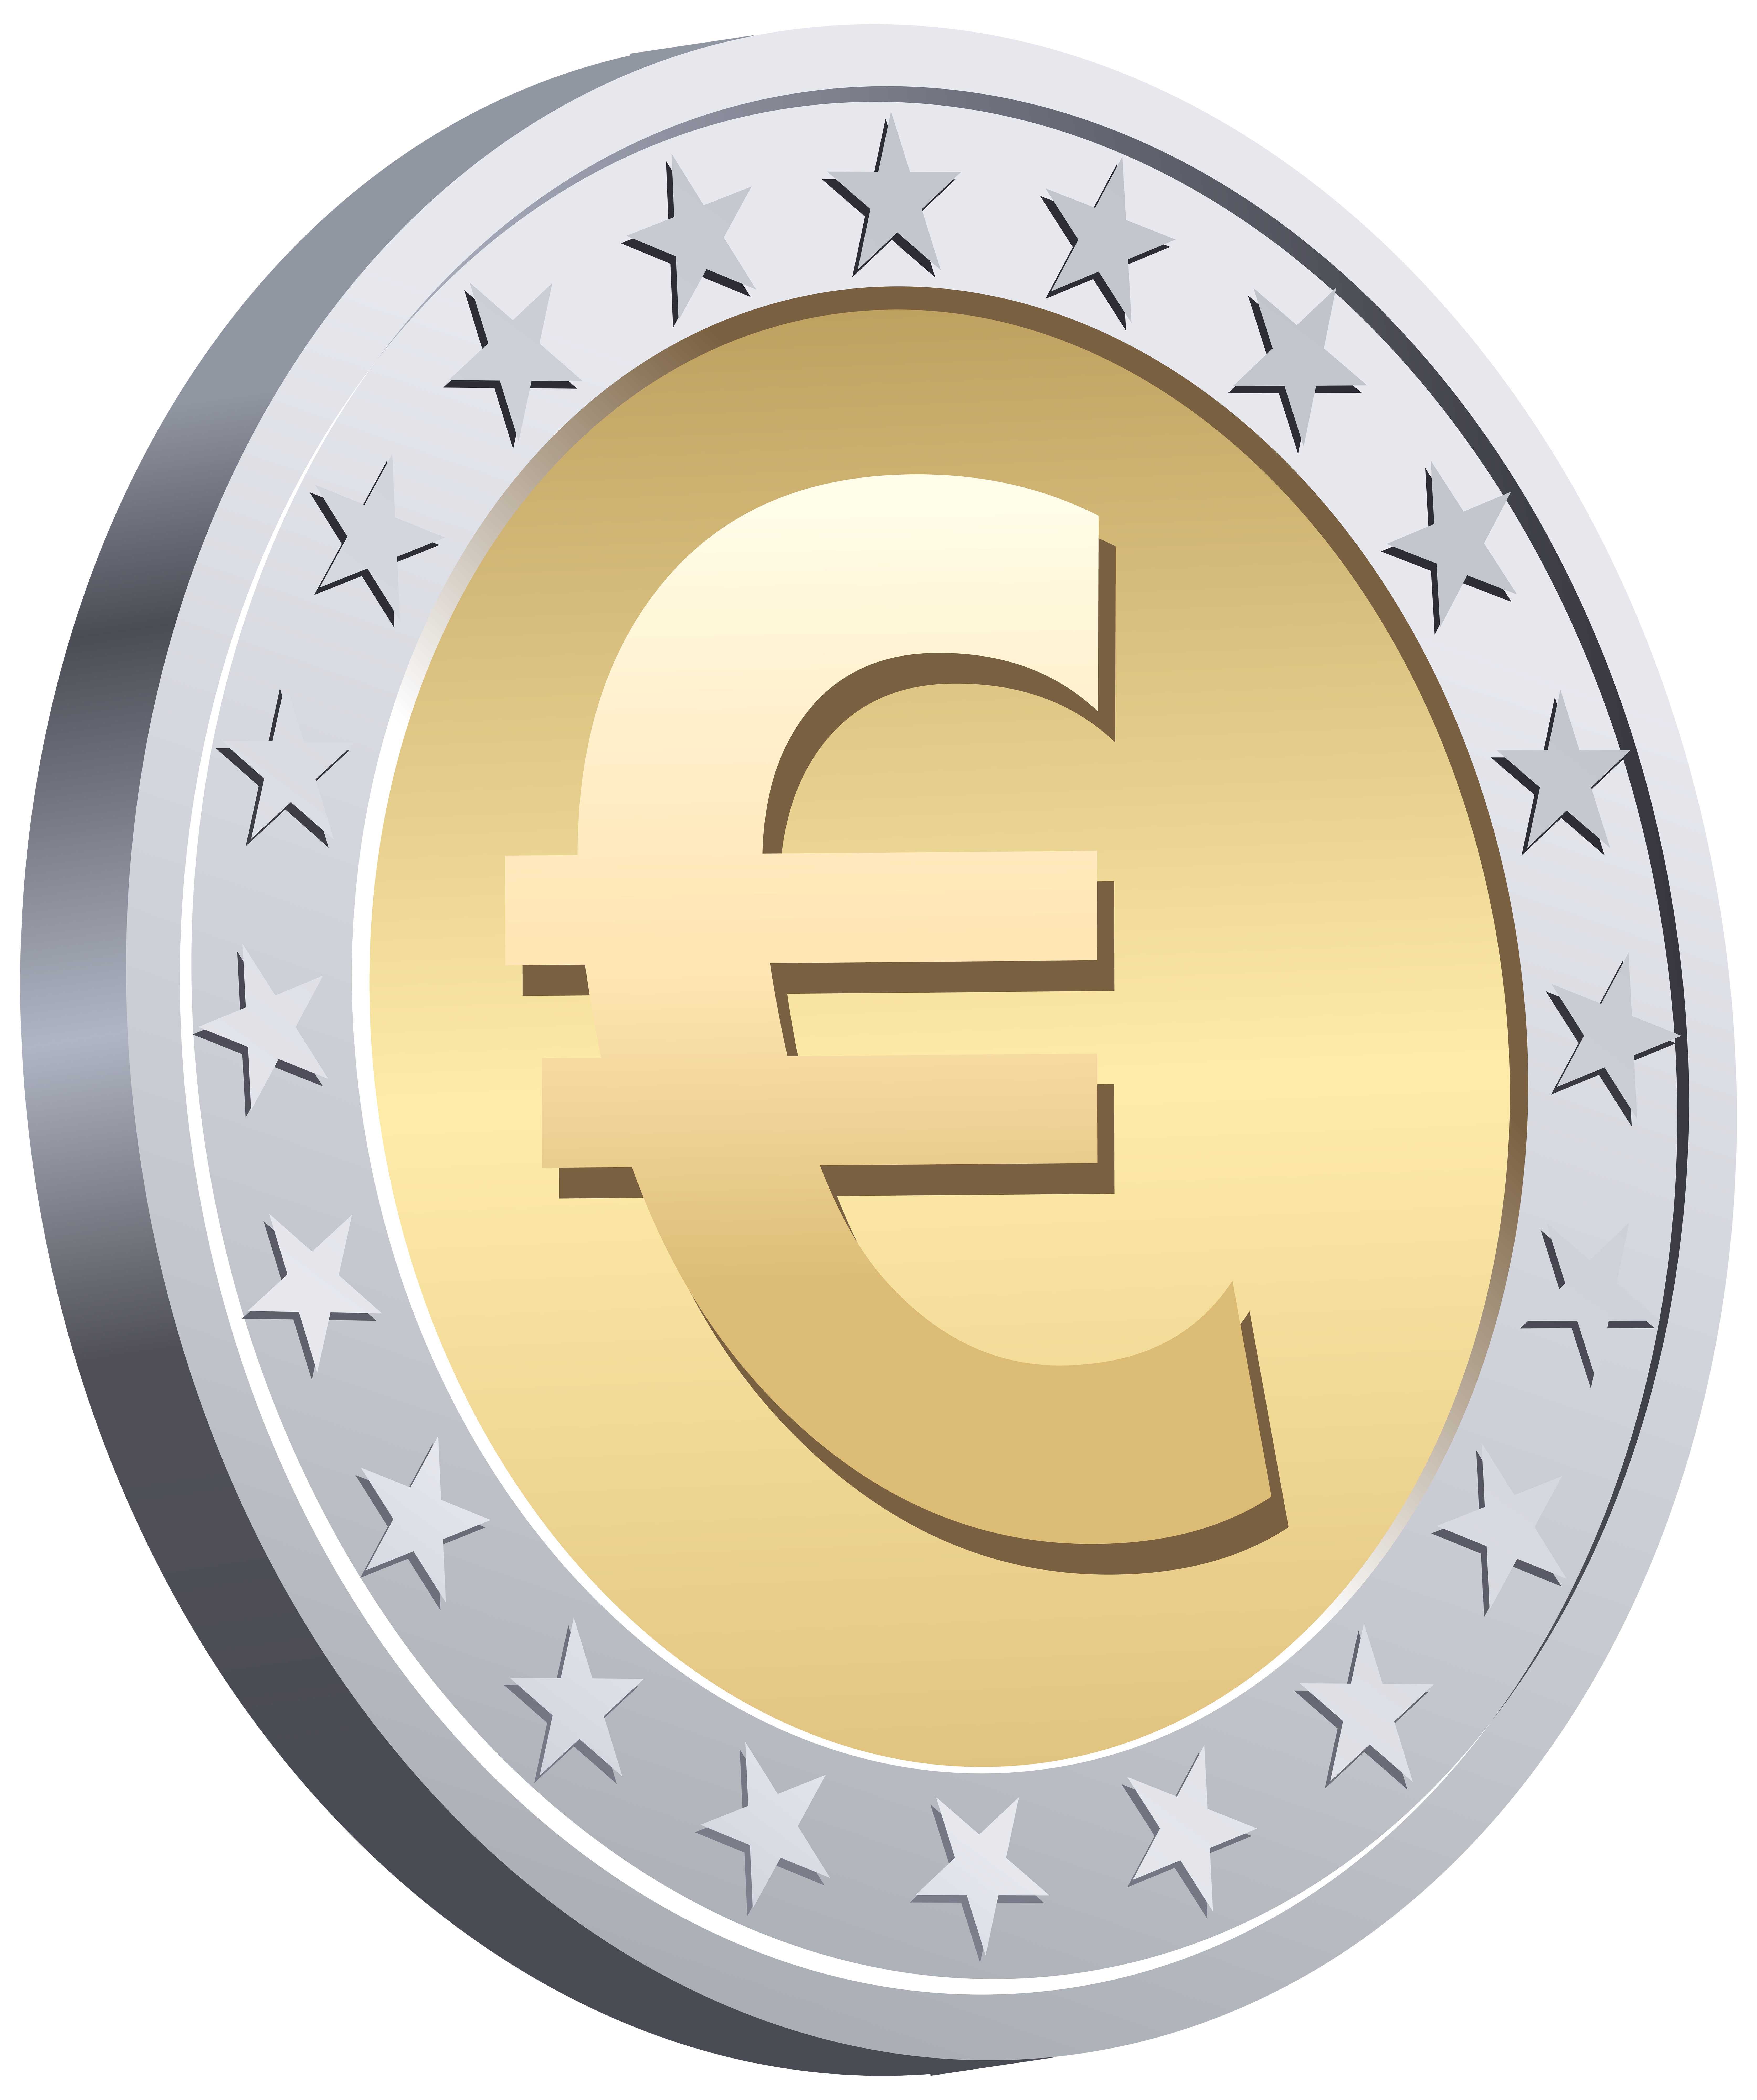 euro currency clipart - photo #27